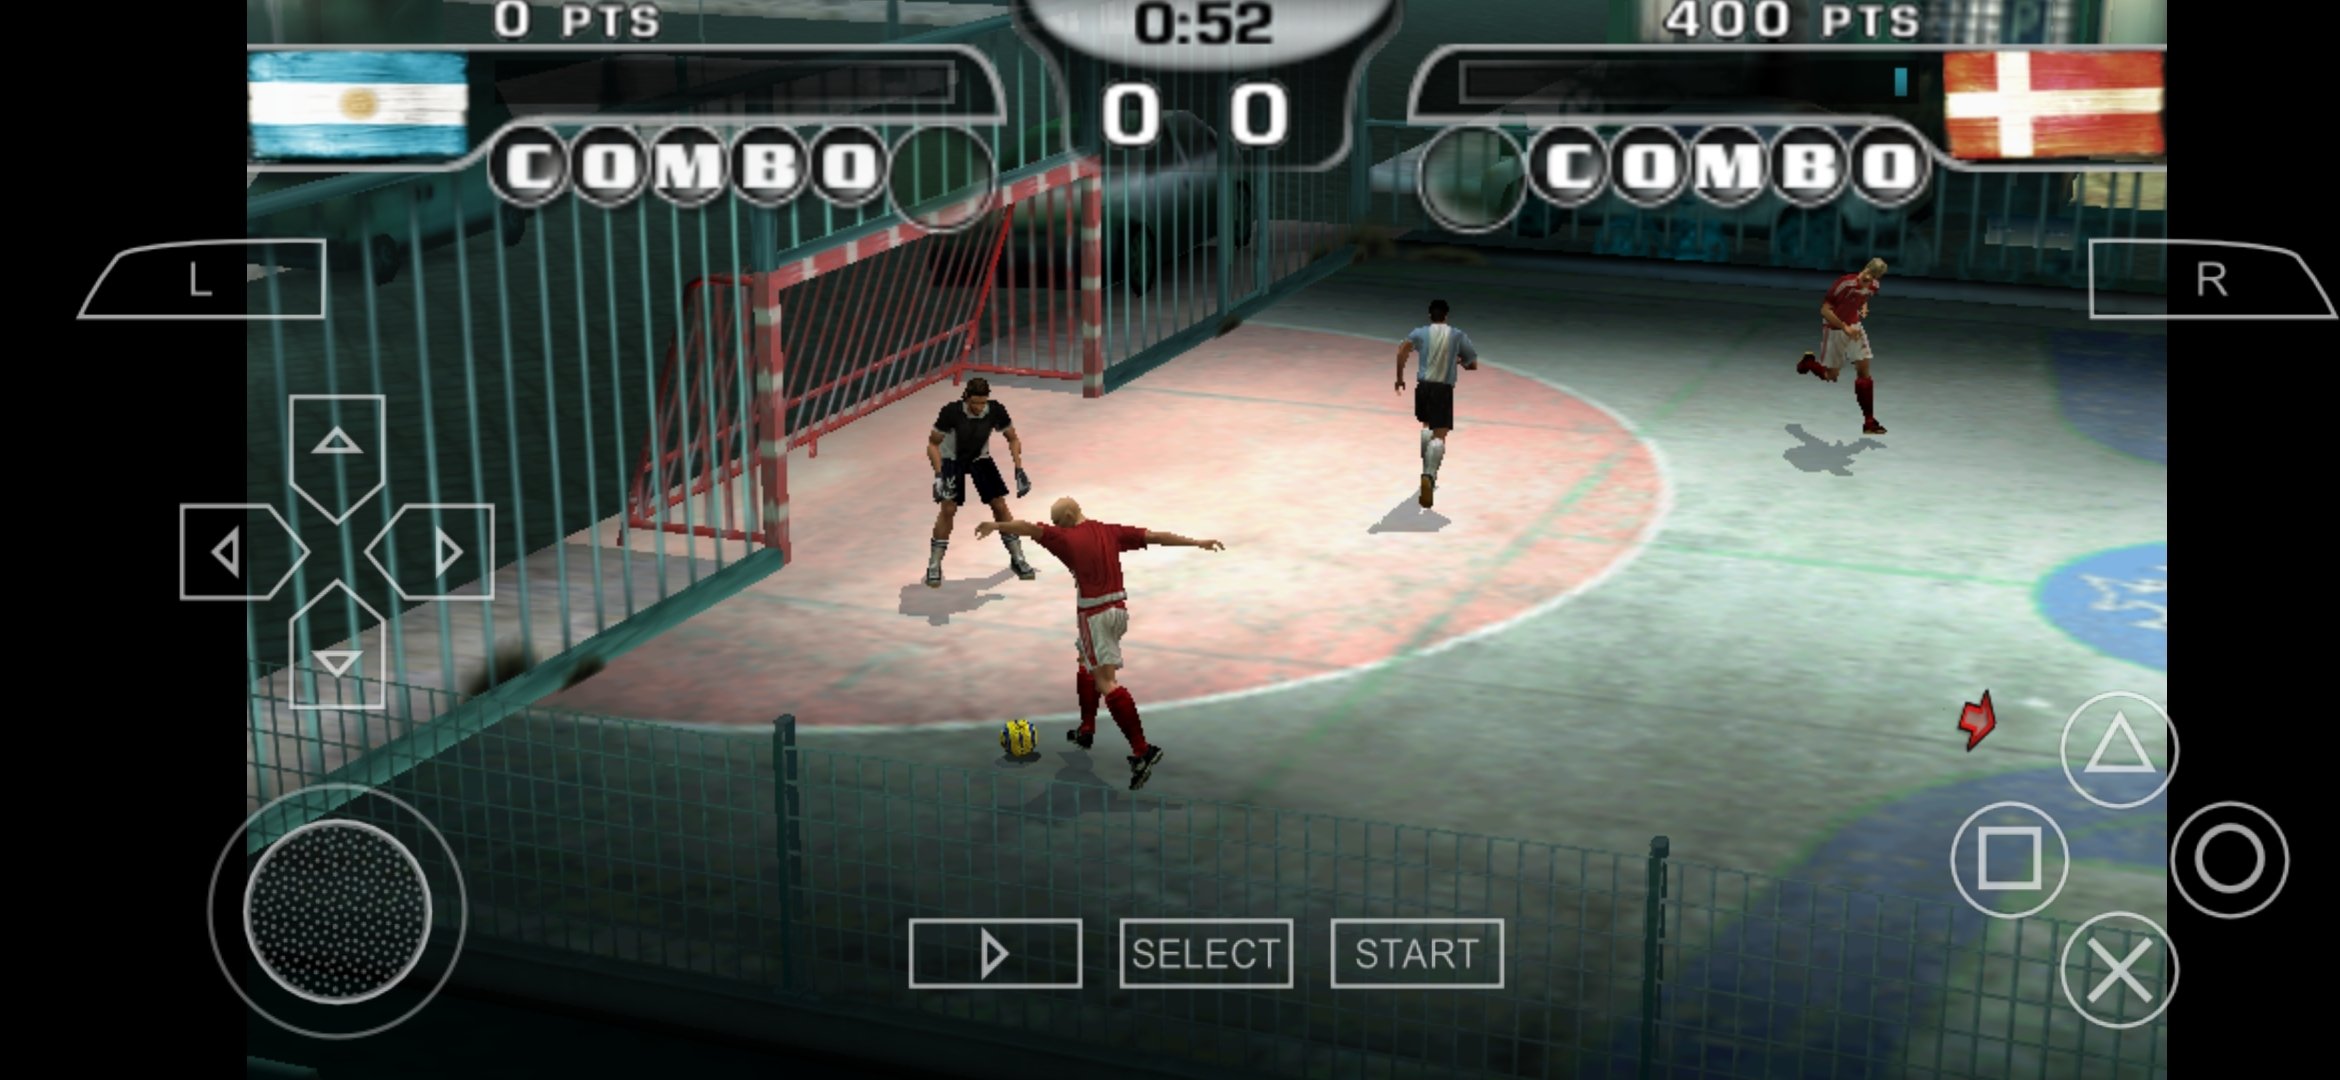 Download fifa 2018 ppsspp 